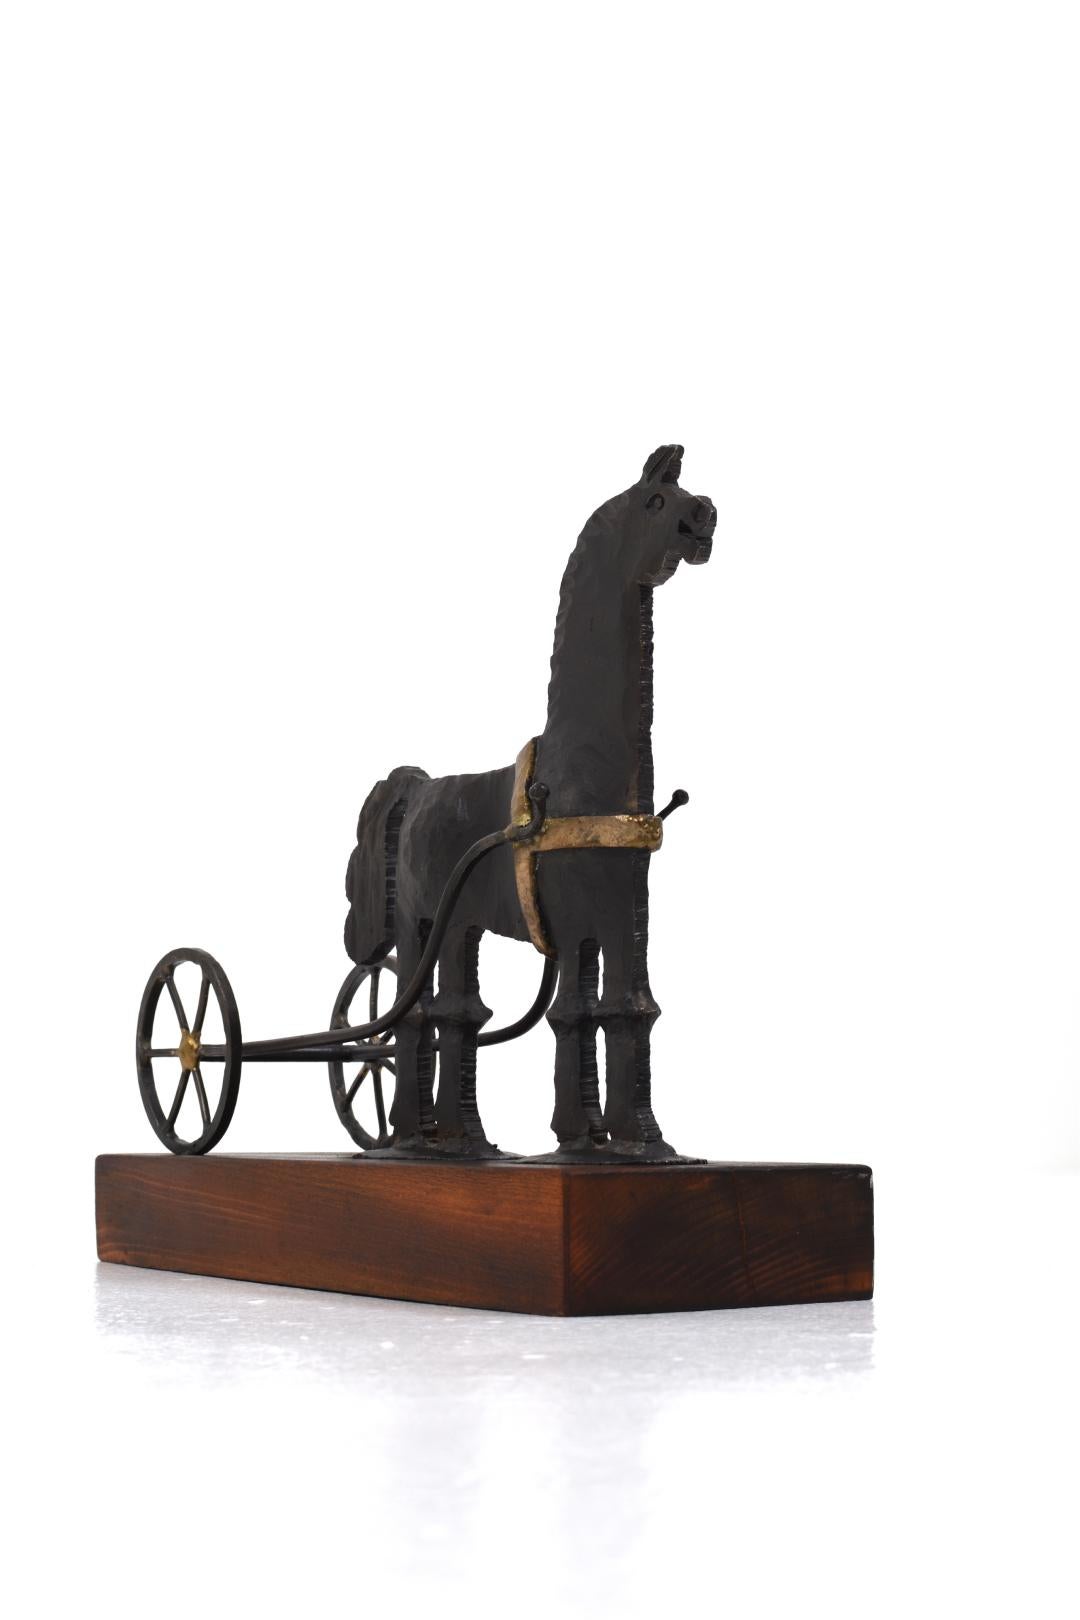 Bertil Vallien and Horst Graf, sculpture, wrought iron in the form of a horse with a cart for Boda Forge.

Bertil Vallien is a Swedish glass artist born in 1938 in Sollentuna. He is known for his sculptural glass objects and sculptures that are